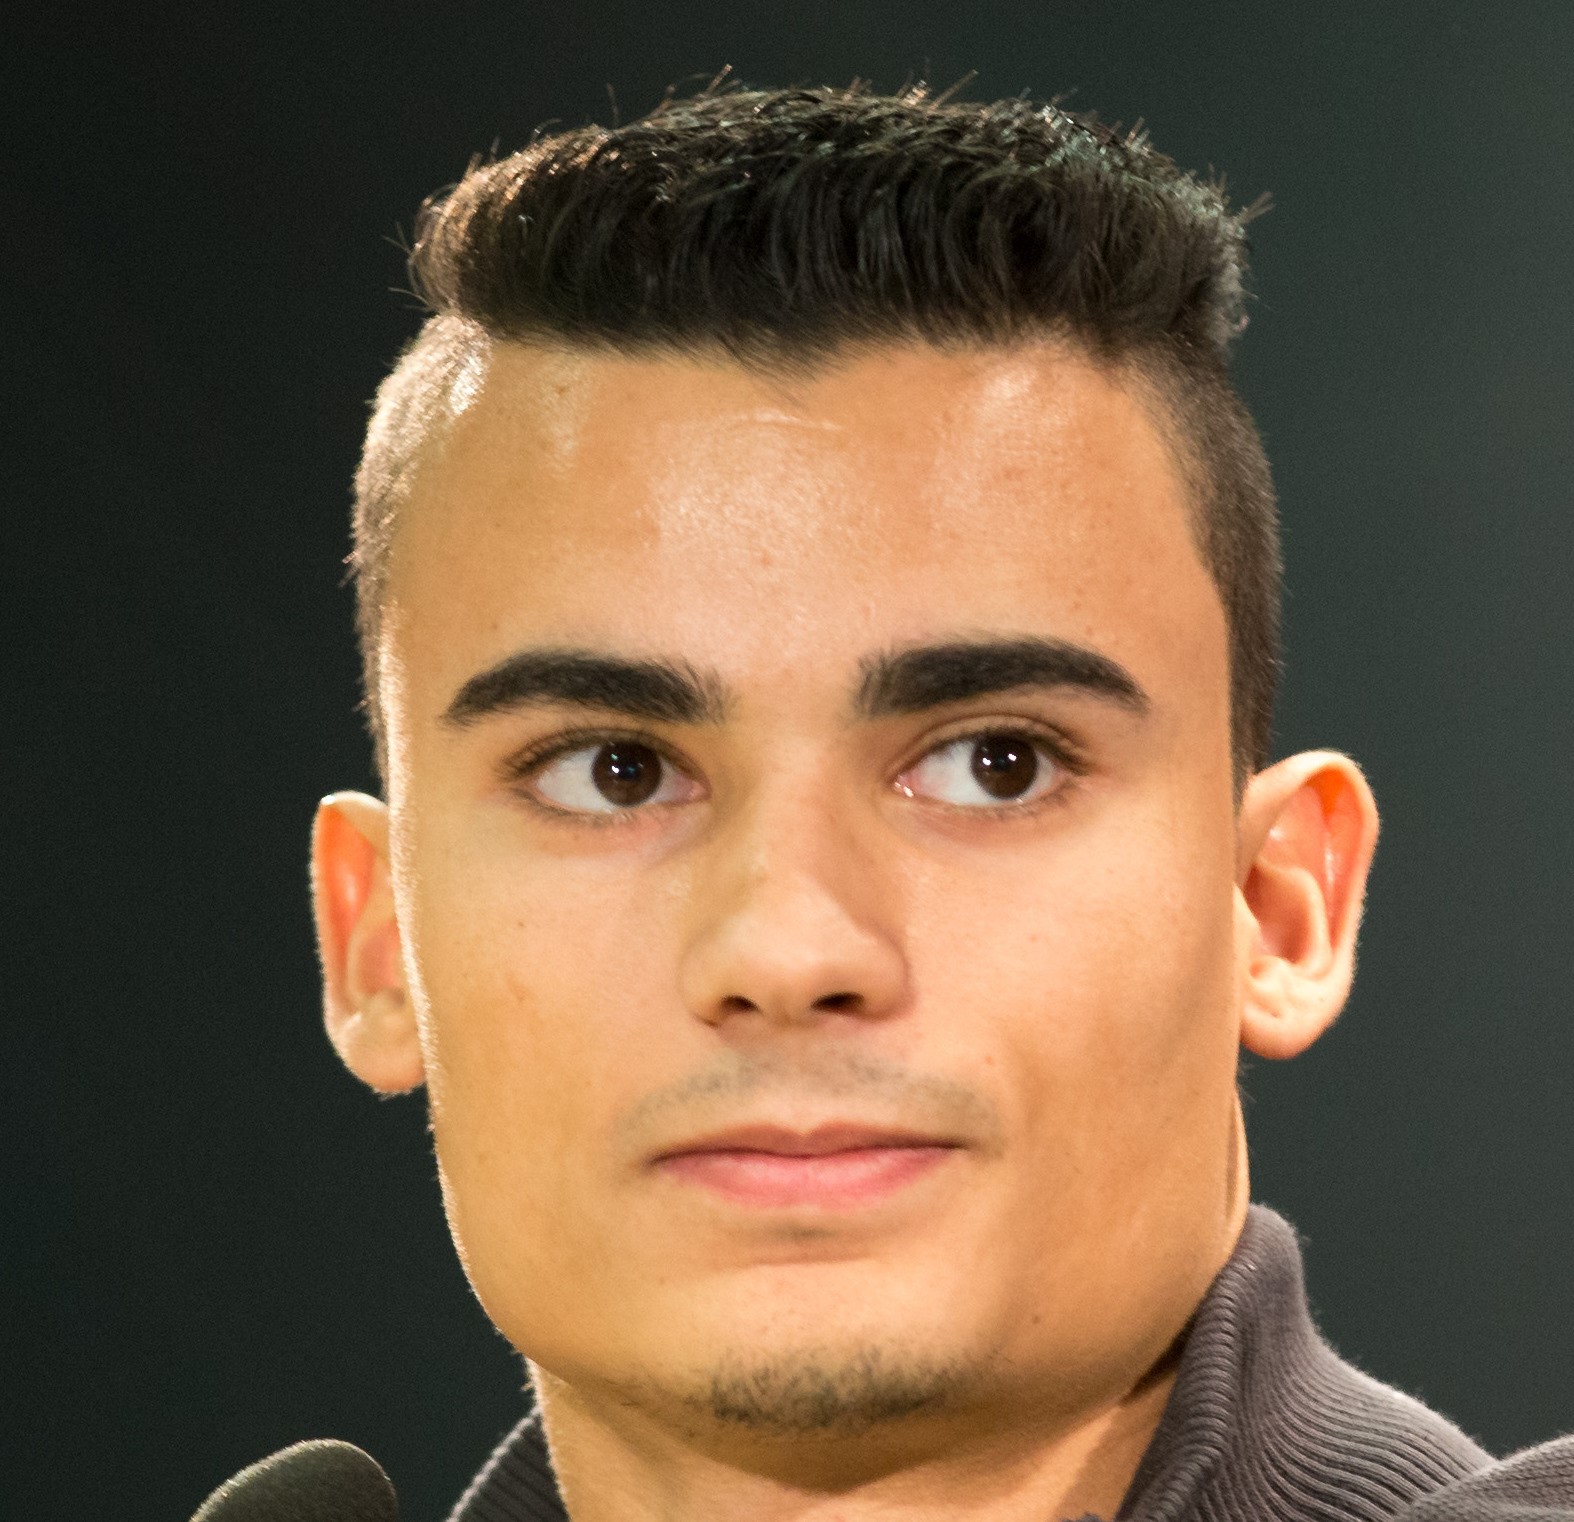 Mercedes gave Manor a big discount on engines so they would take German driver Pascal Wehrlein